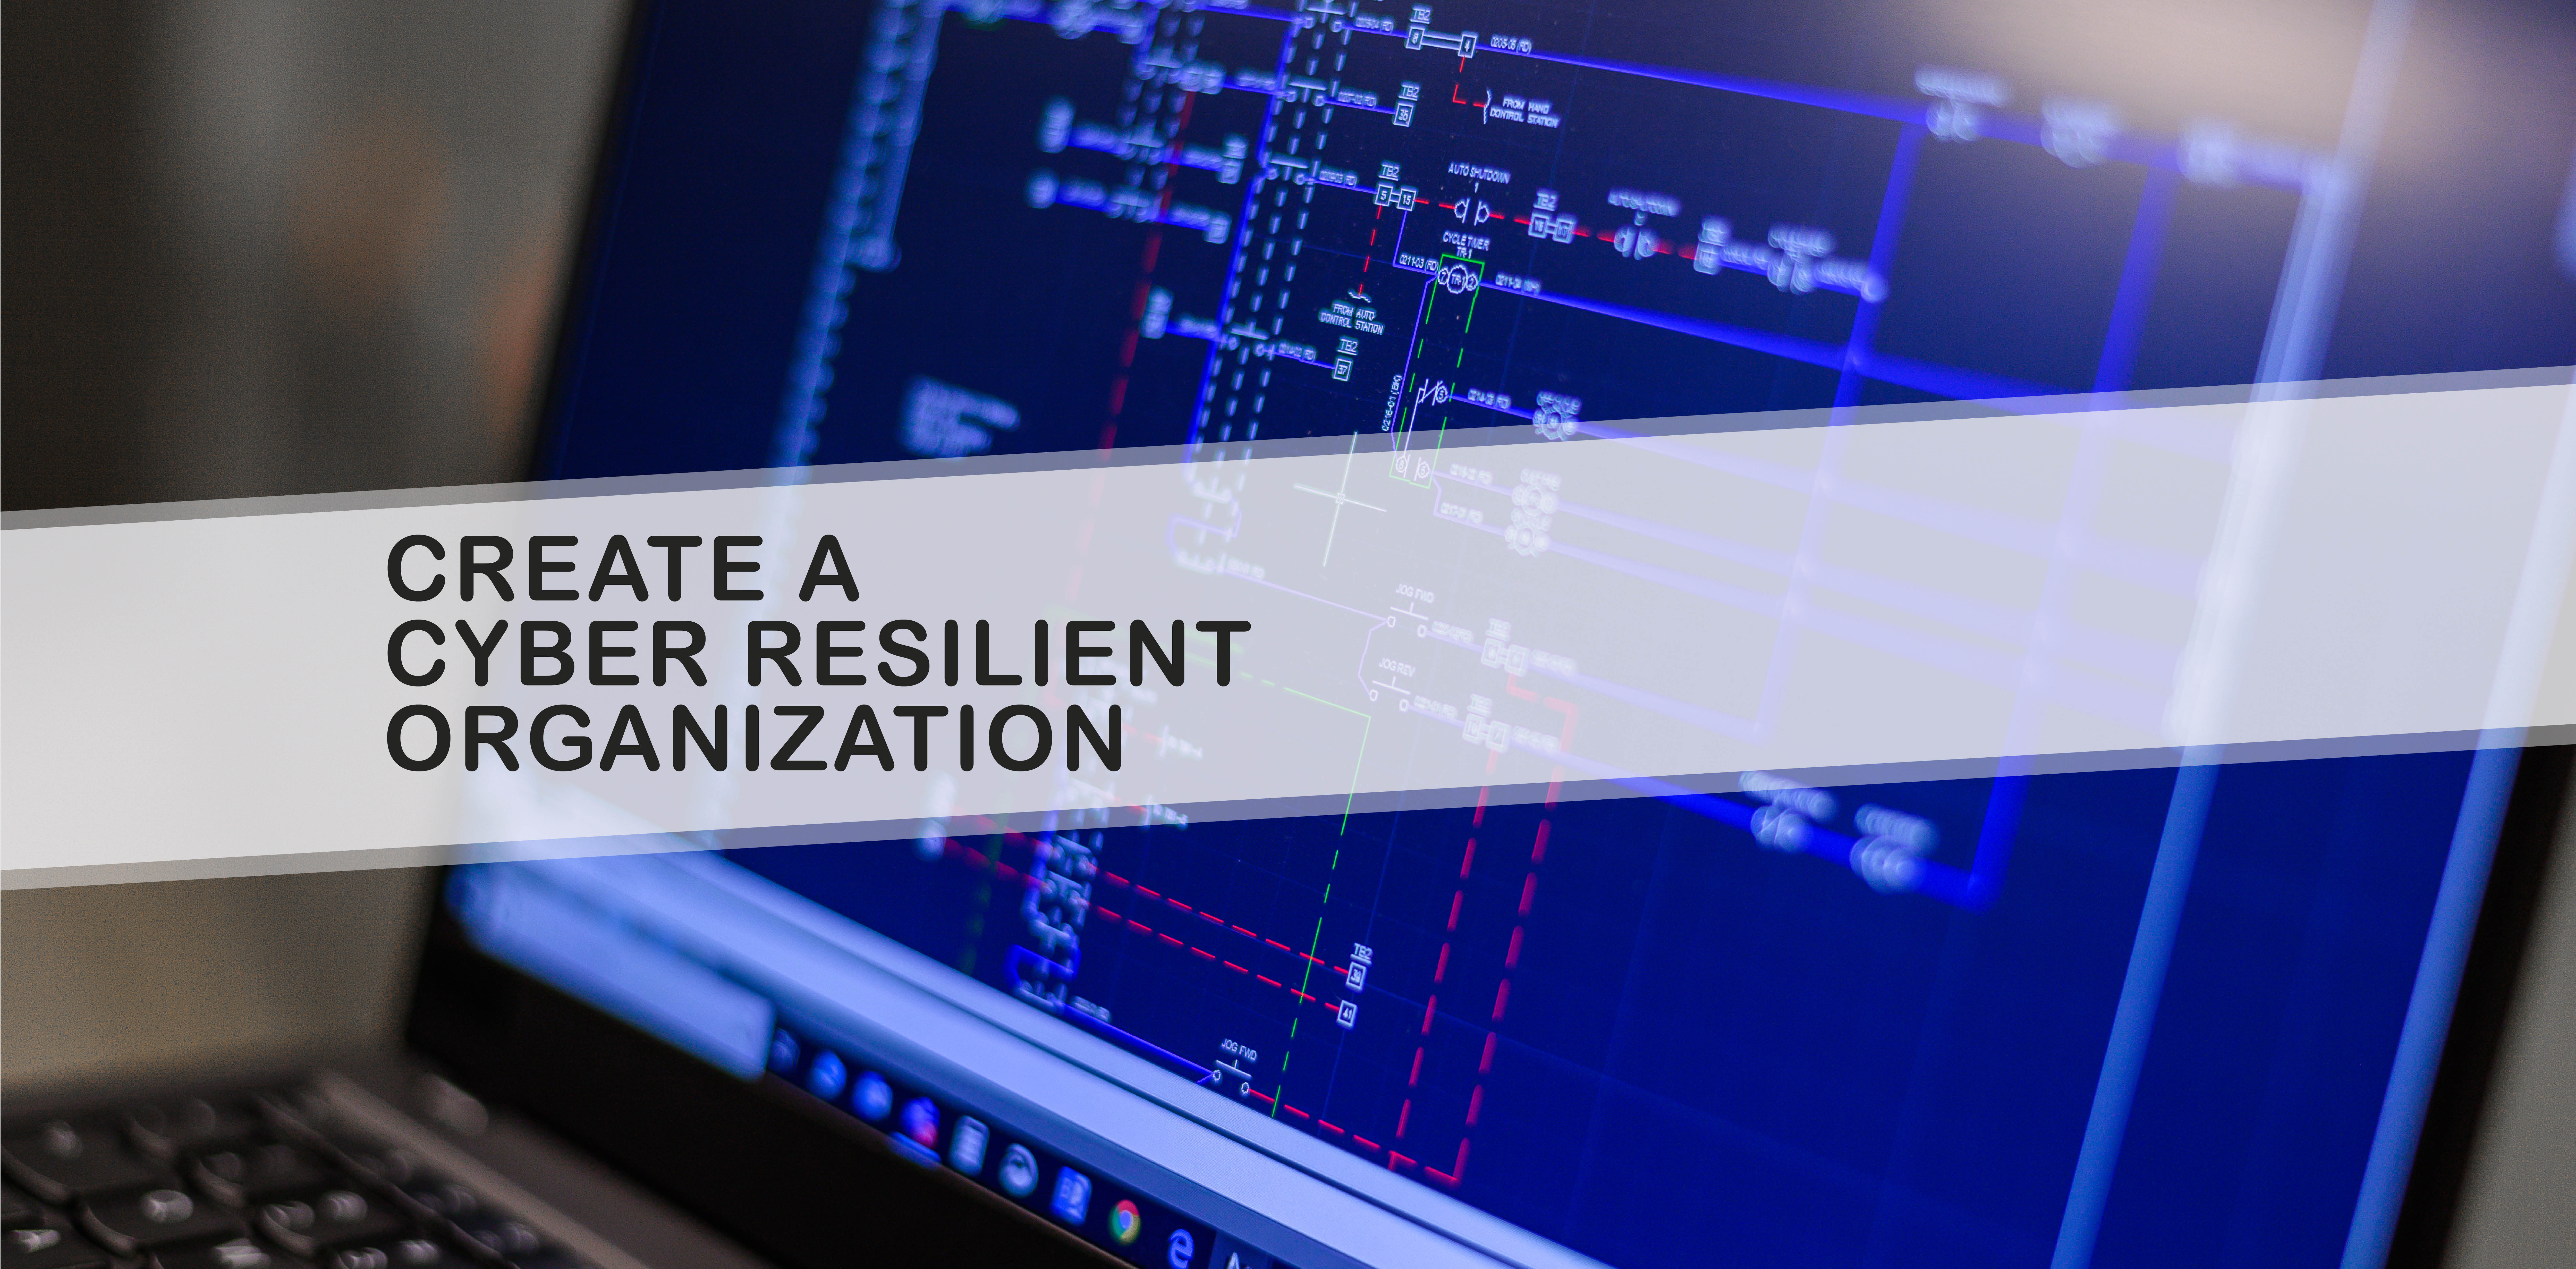 Creating and Maintaining a Cyber Resilient Organization